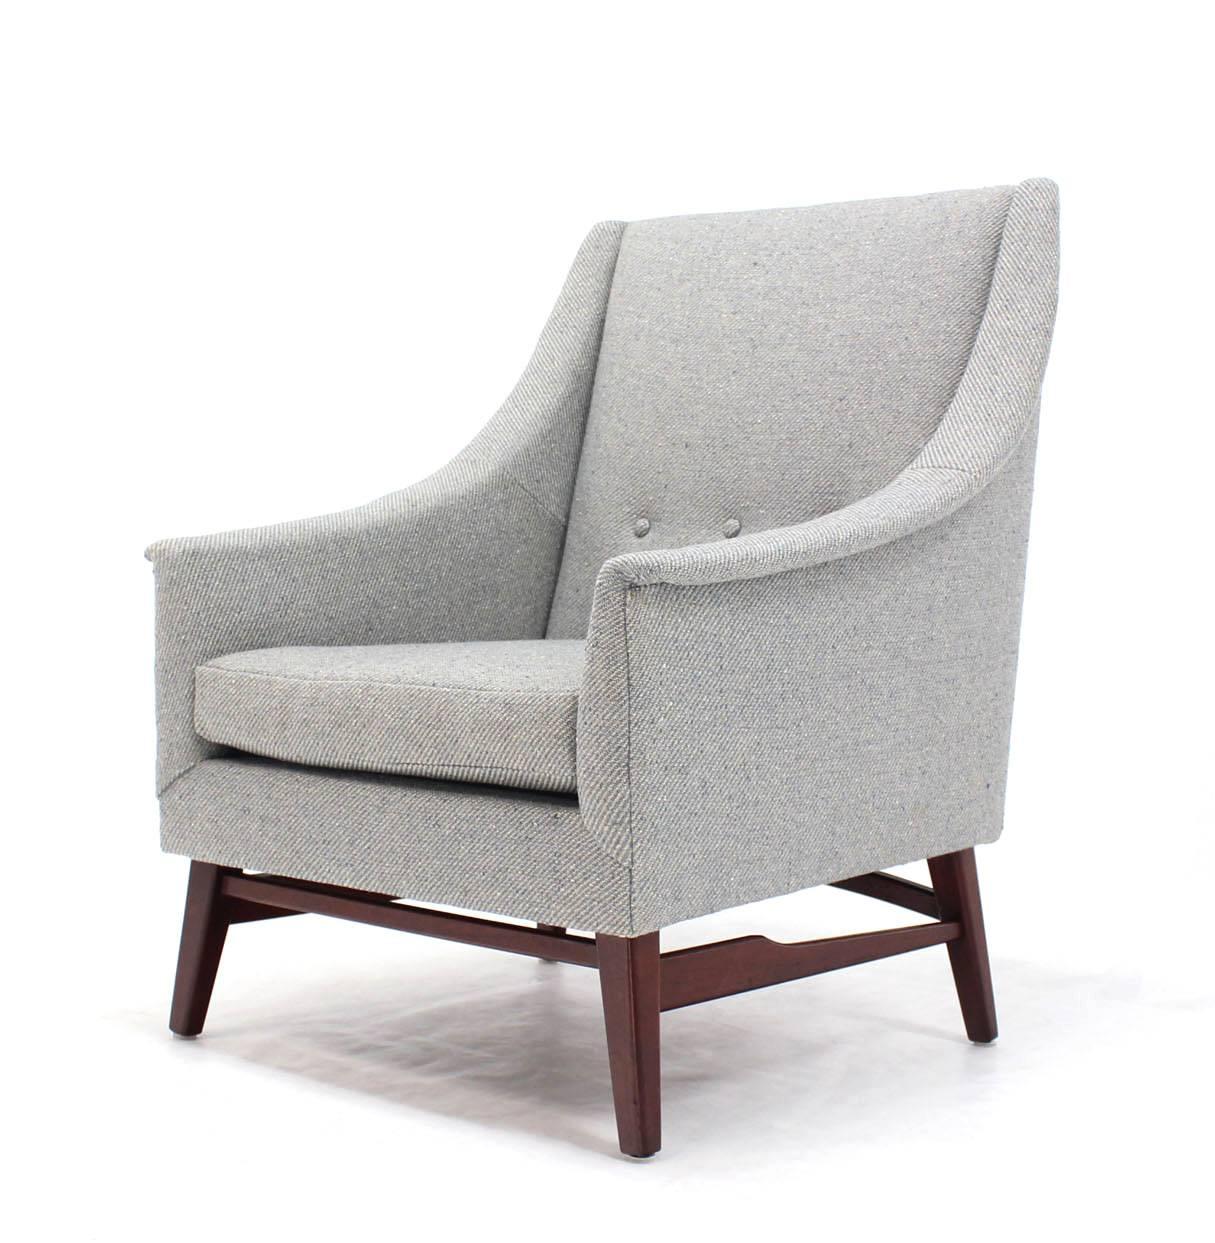 20th Century Newly Upholstered Danish Modern Lounge Chair Walnut Base For Sale